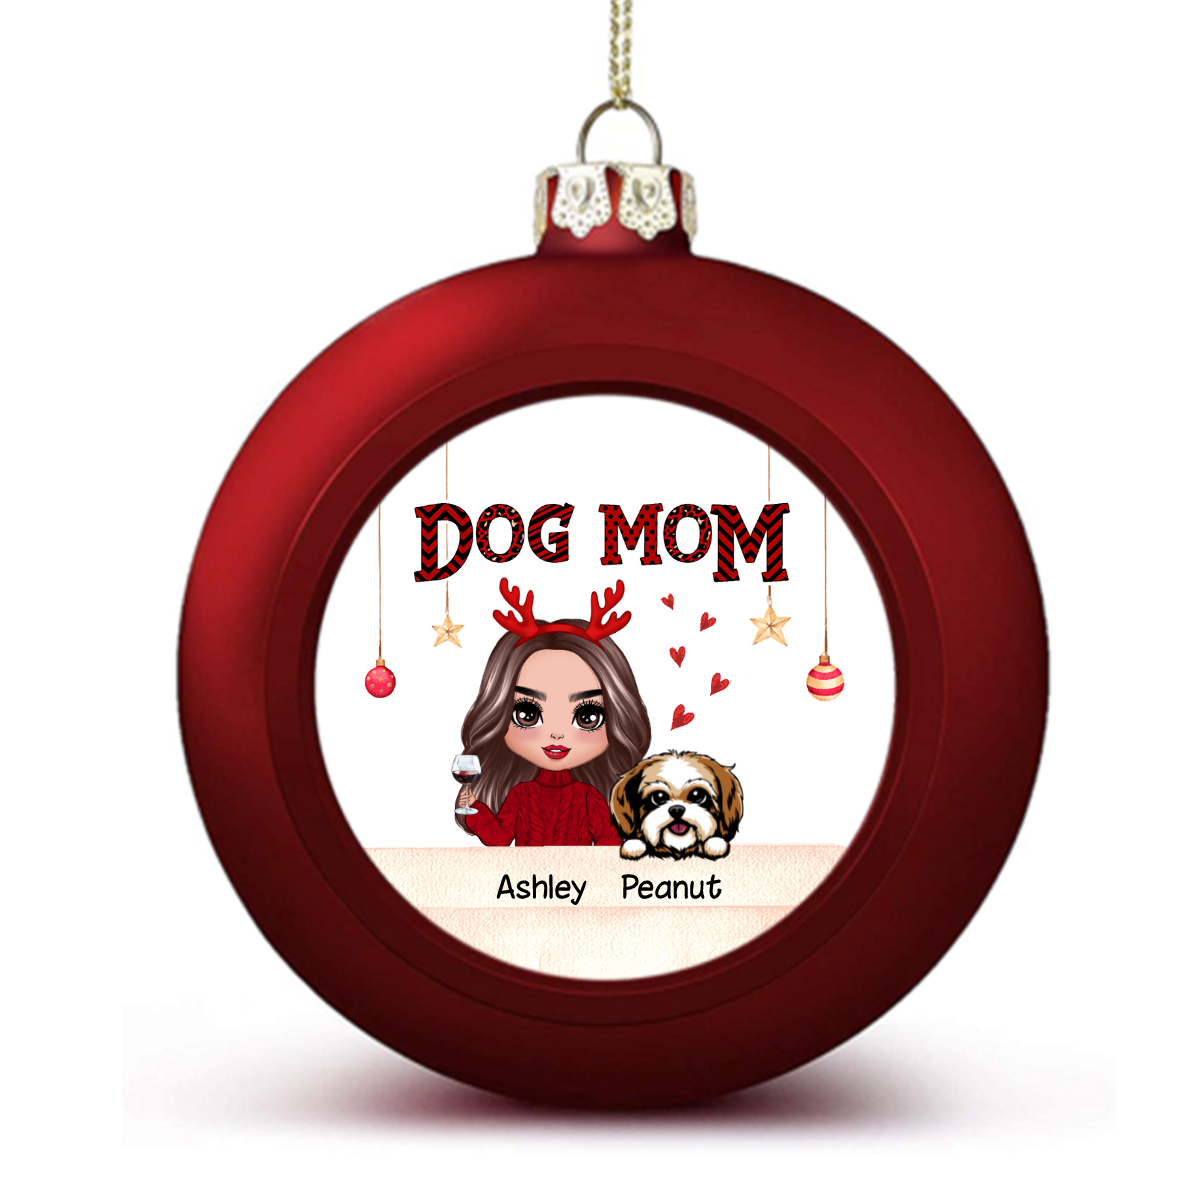 Doll Girl Dog Mom Personalized Ball Ornaments